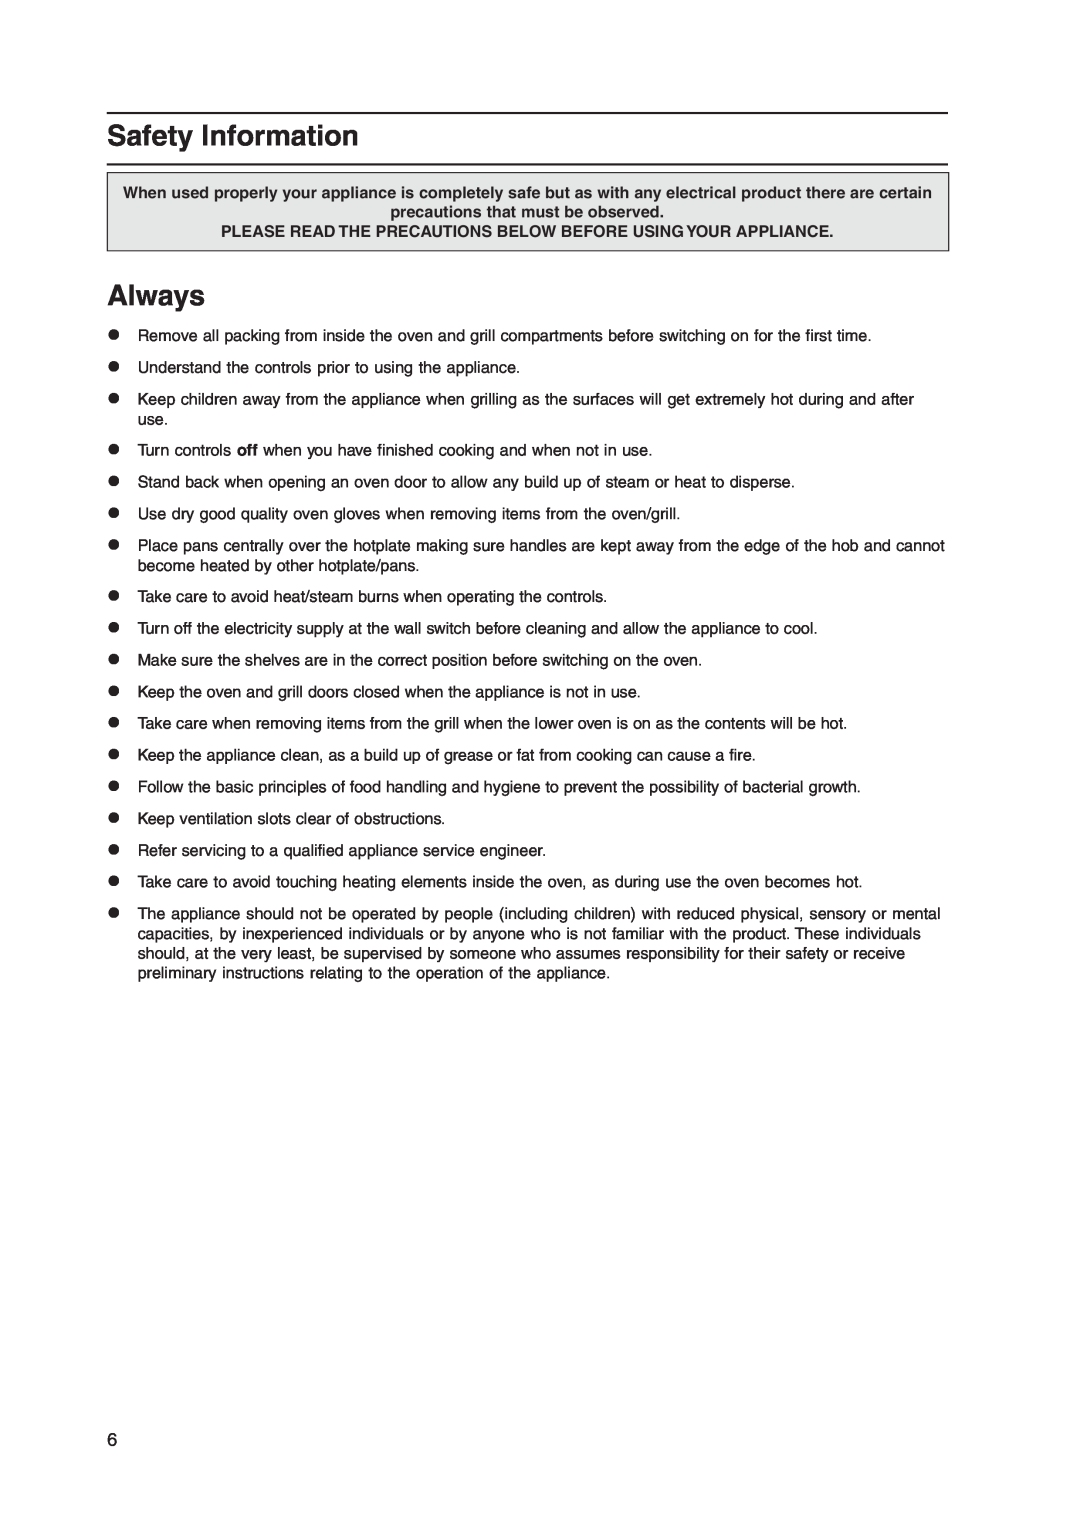 Indesit KD3C1/G manual Safety Information, Always, precautions that must be observed 